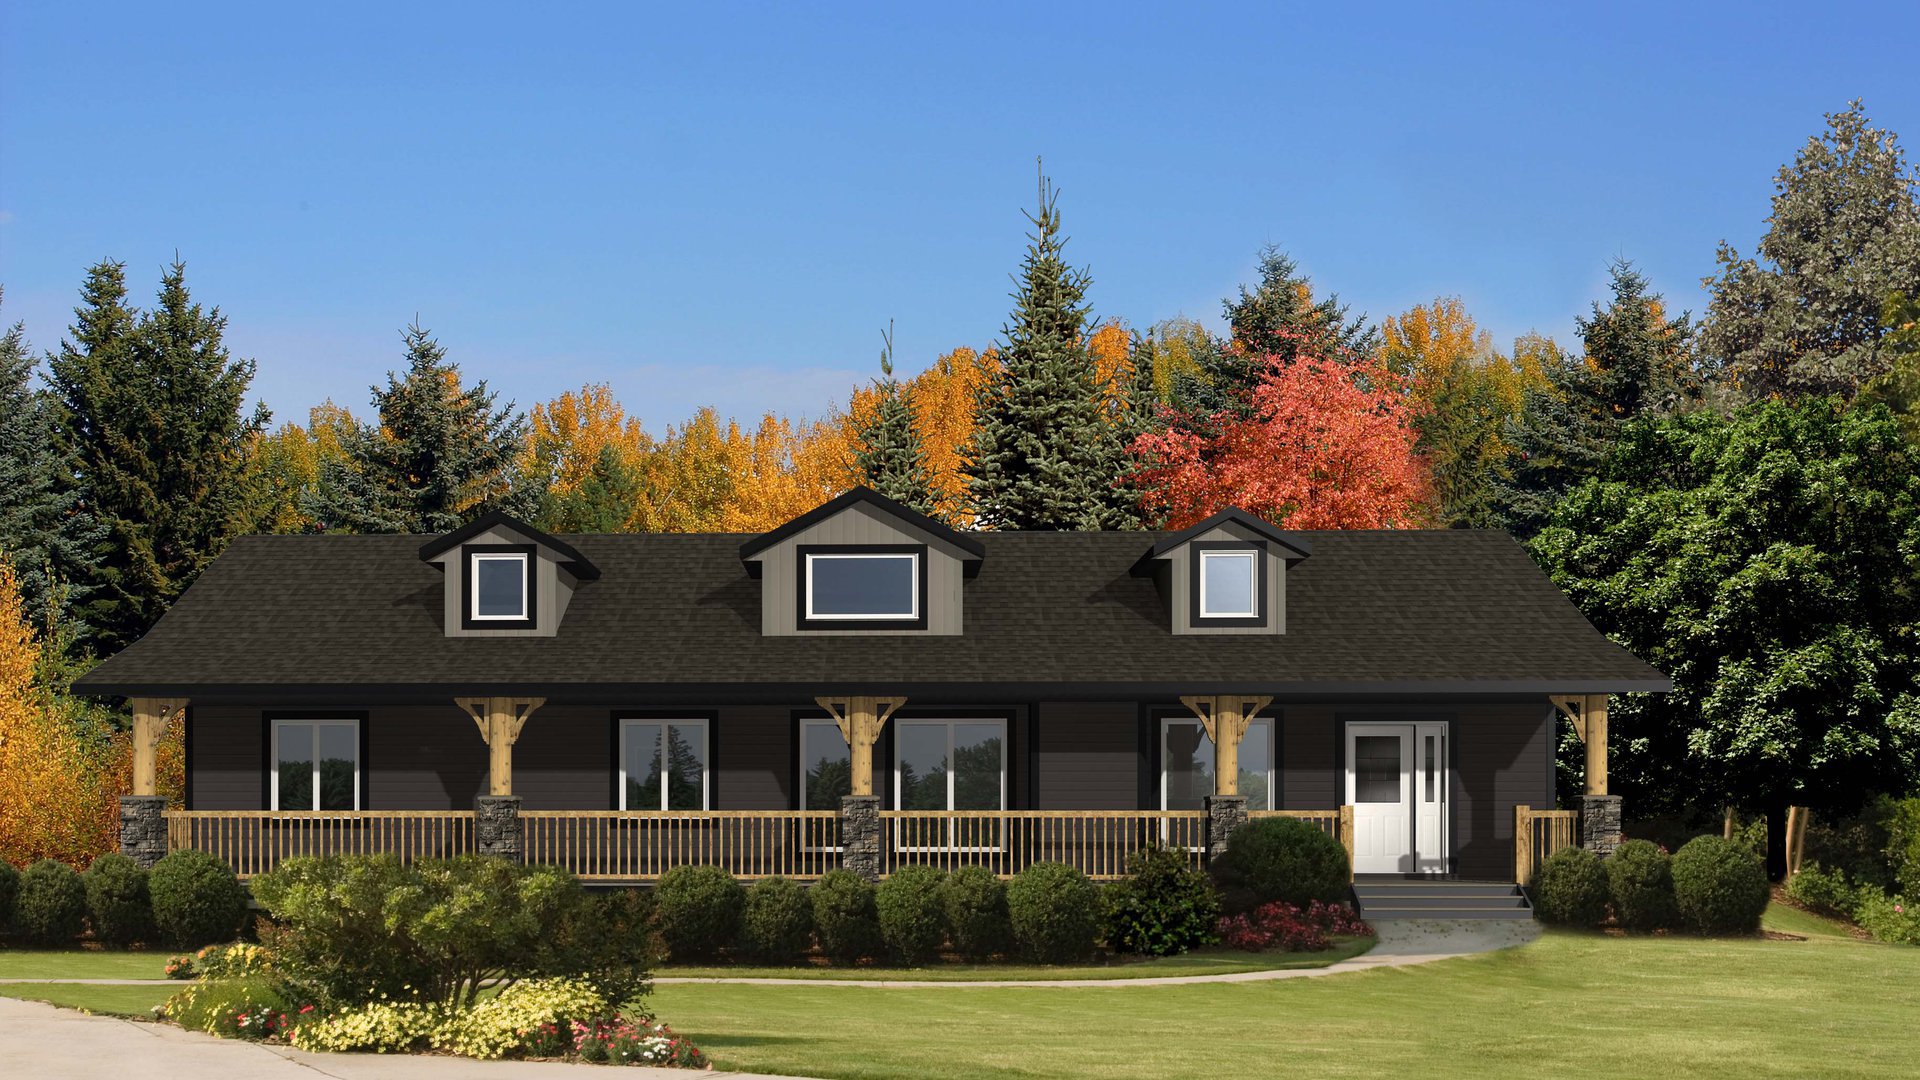 Meadowbrook house plan nelson homes modular homes ready to move homes prefabricated homes.jpg